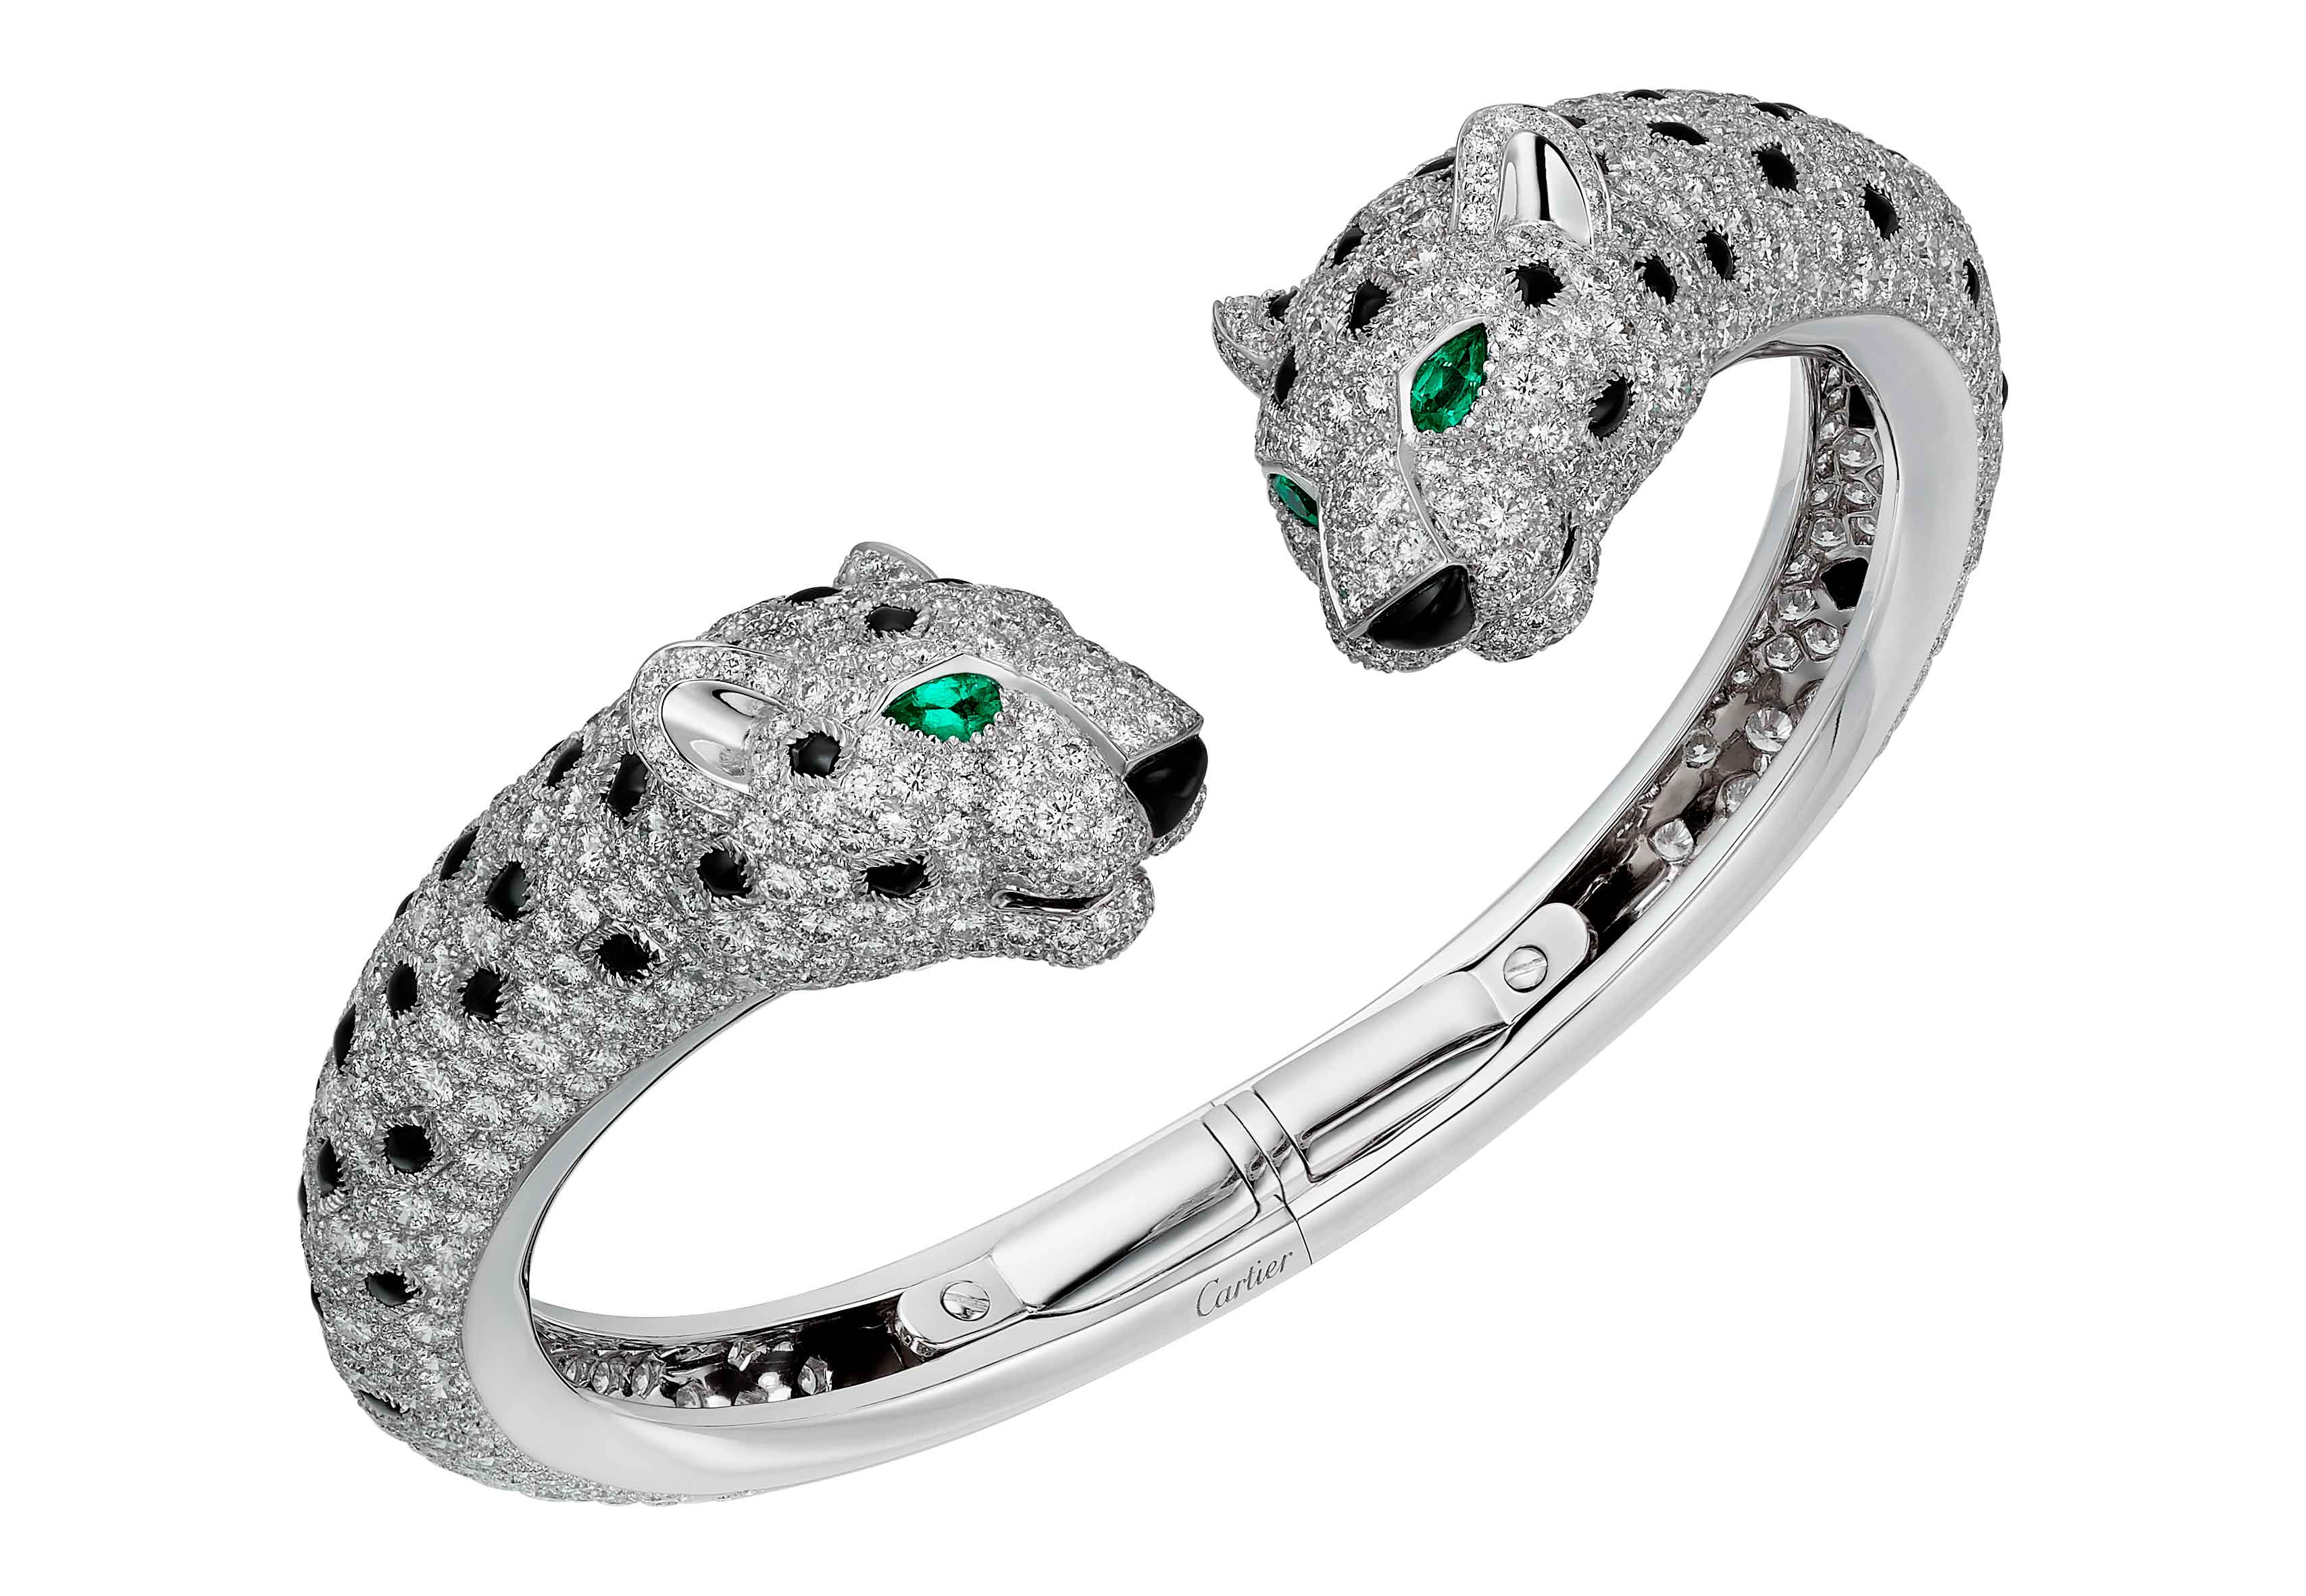 The Cartier panther: an examination of 